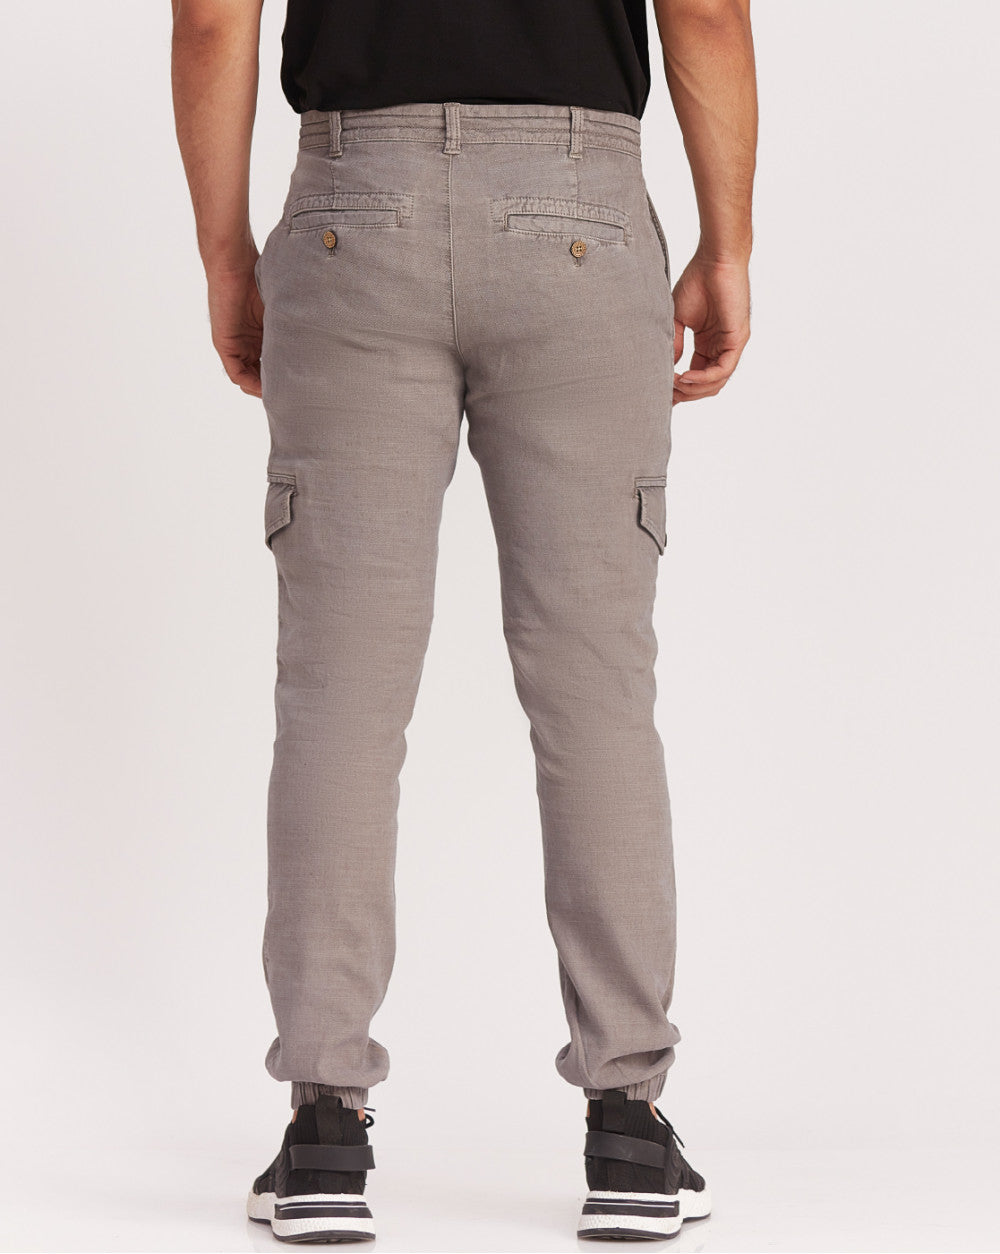 Tapered Fit Leisure Cargos - Charcoal